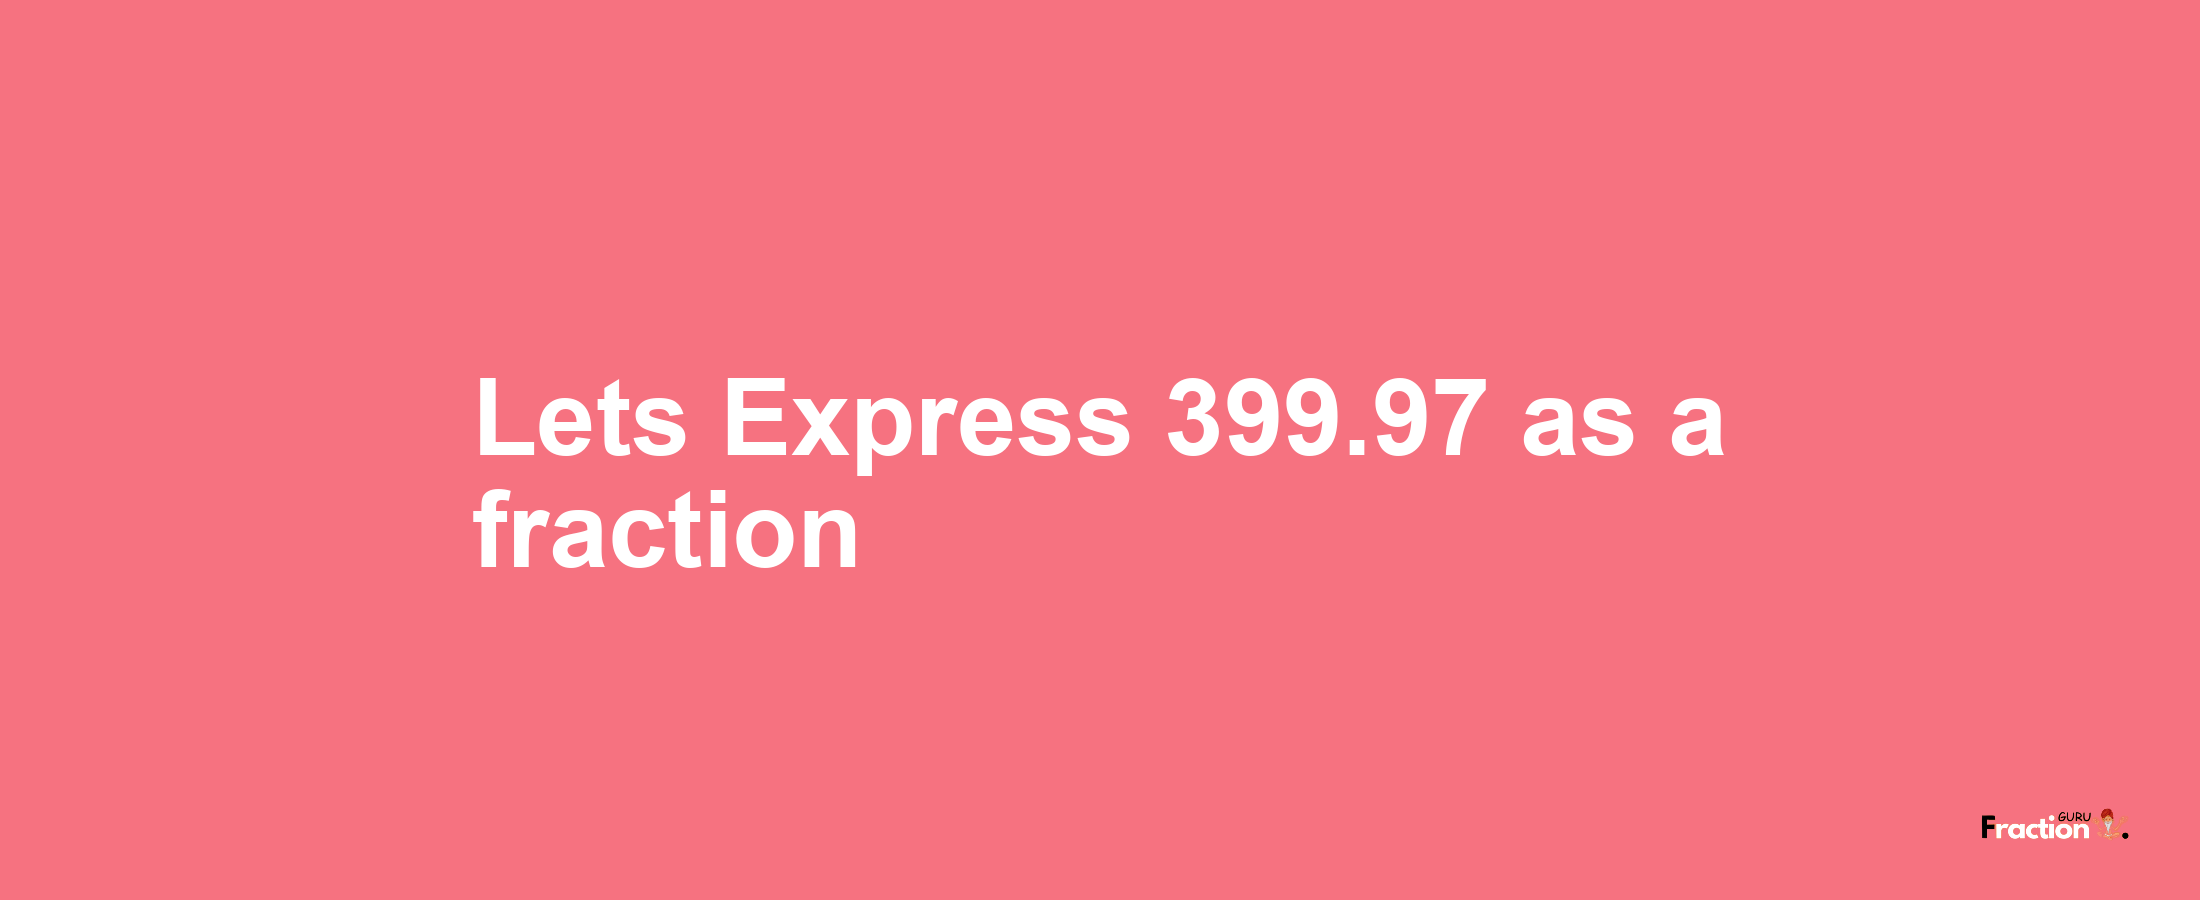 Lets Express 399.97 as afraction